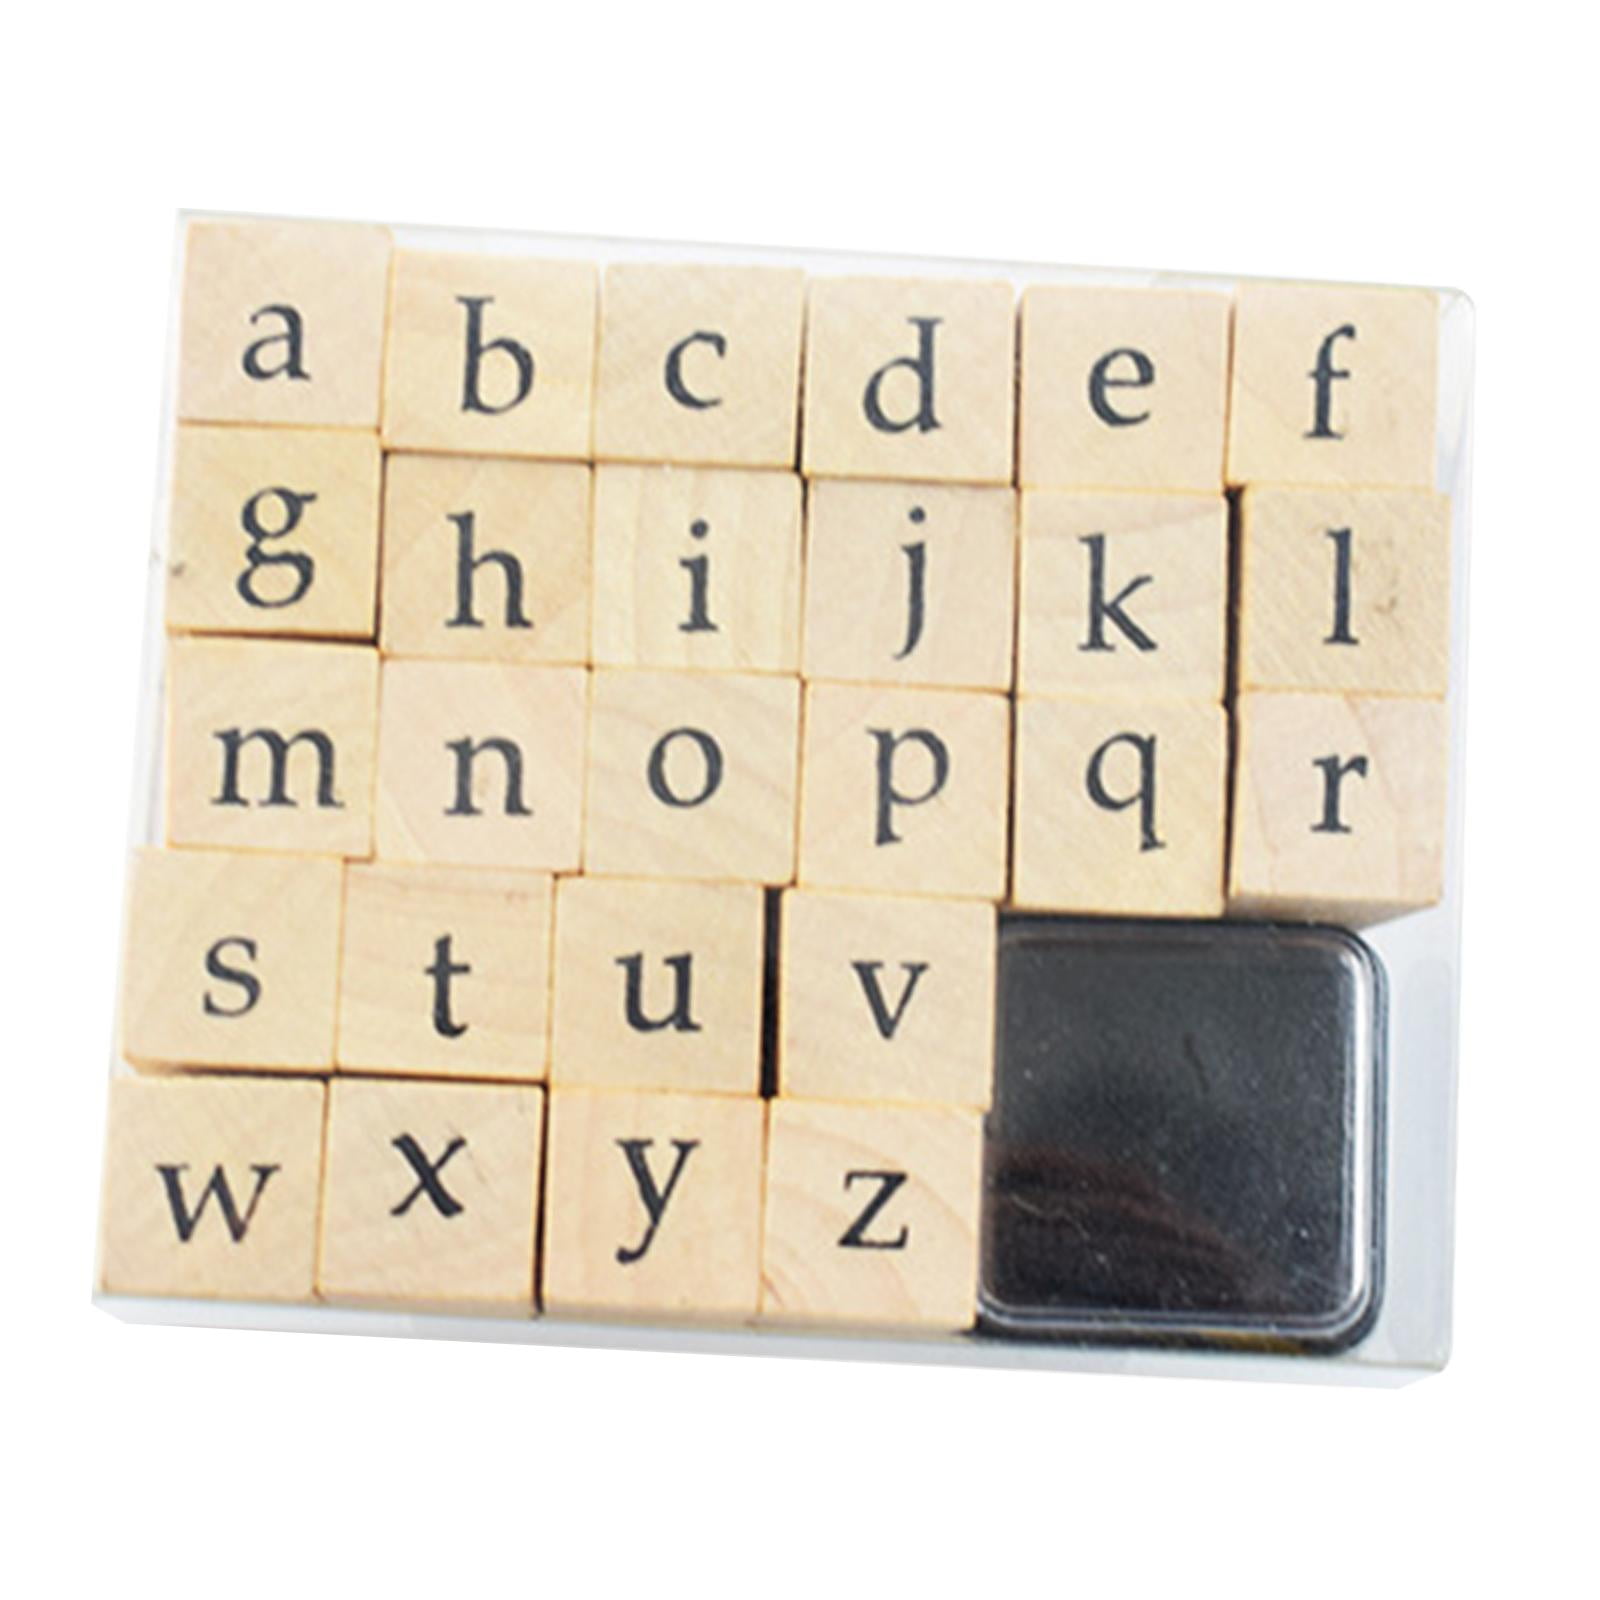 Toptime Letter Stamps, 40 PCS Wooden Stamp Set - Lowercase Letters and  Emoji, Vintage Rubber Stamps with Round Circle, Alphabet Stamps with Ink  Pad, Stamp Kit for Scrapbooking, Crafting, Card Making 